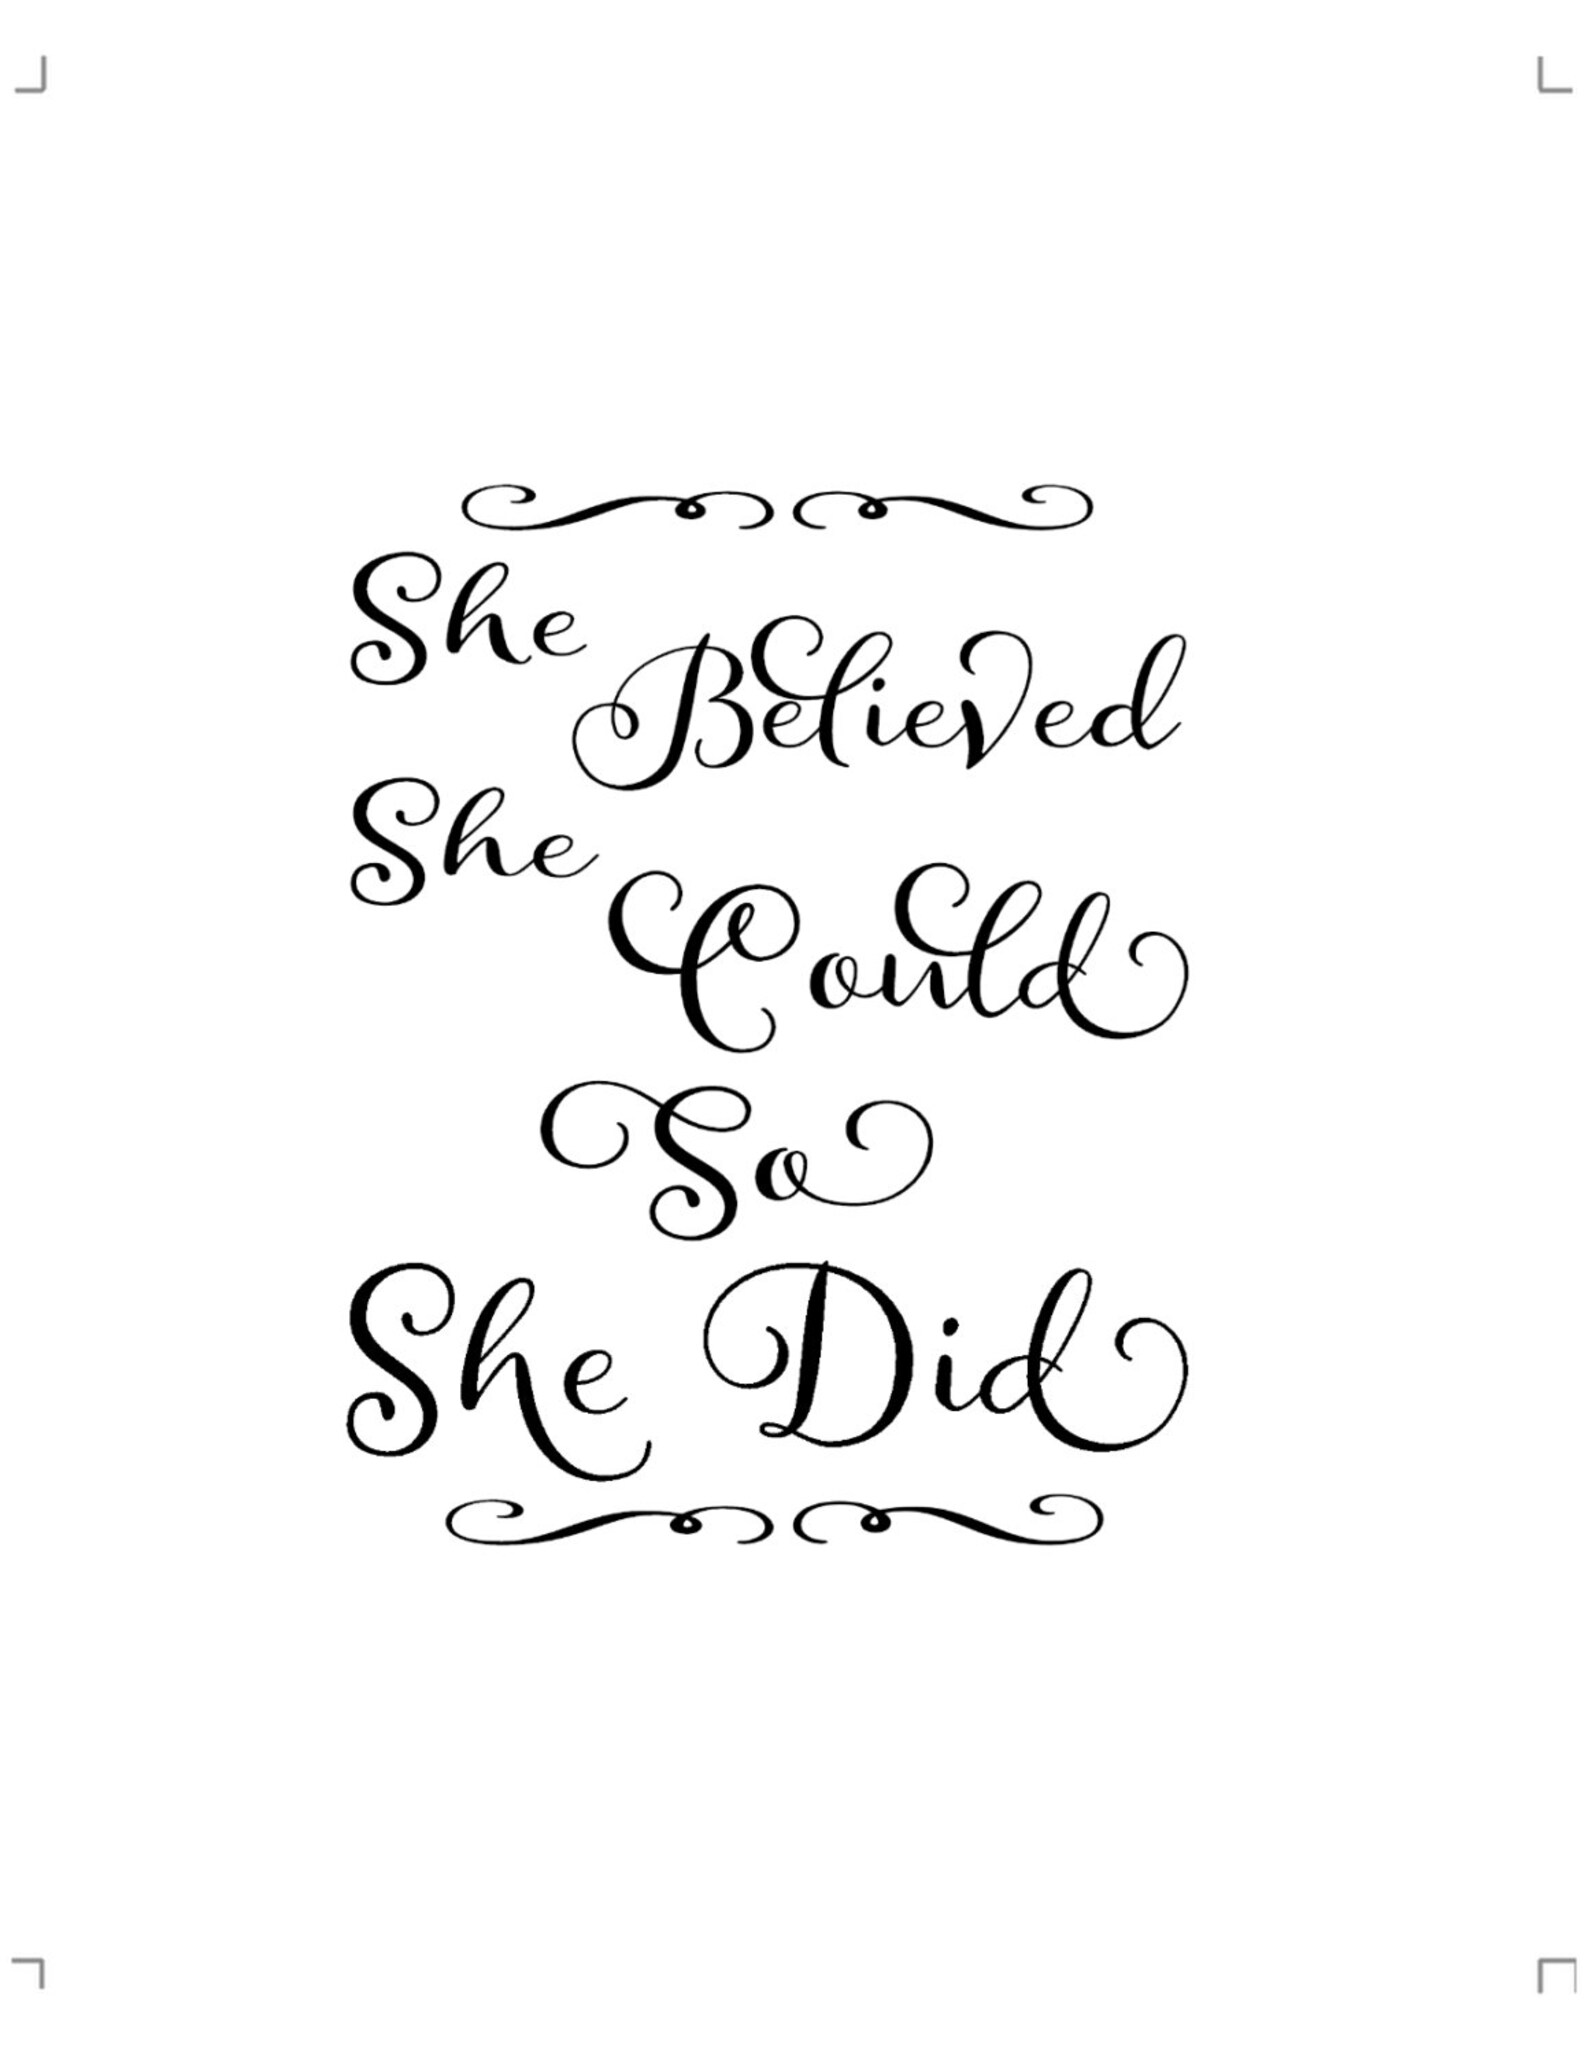 She Believed Quoteprintable Instant Downlaod in Calligraphy - Etsy